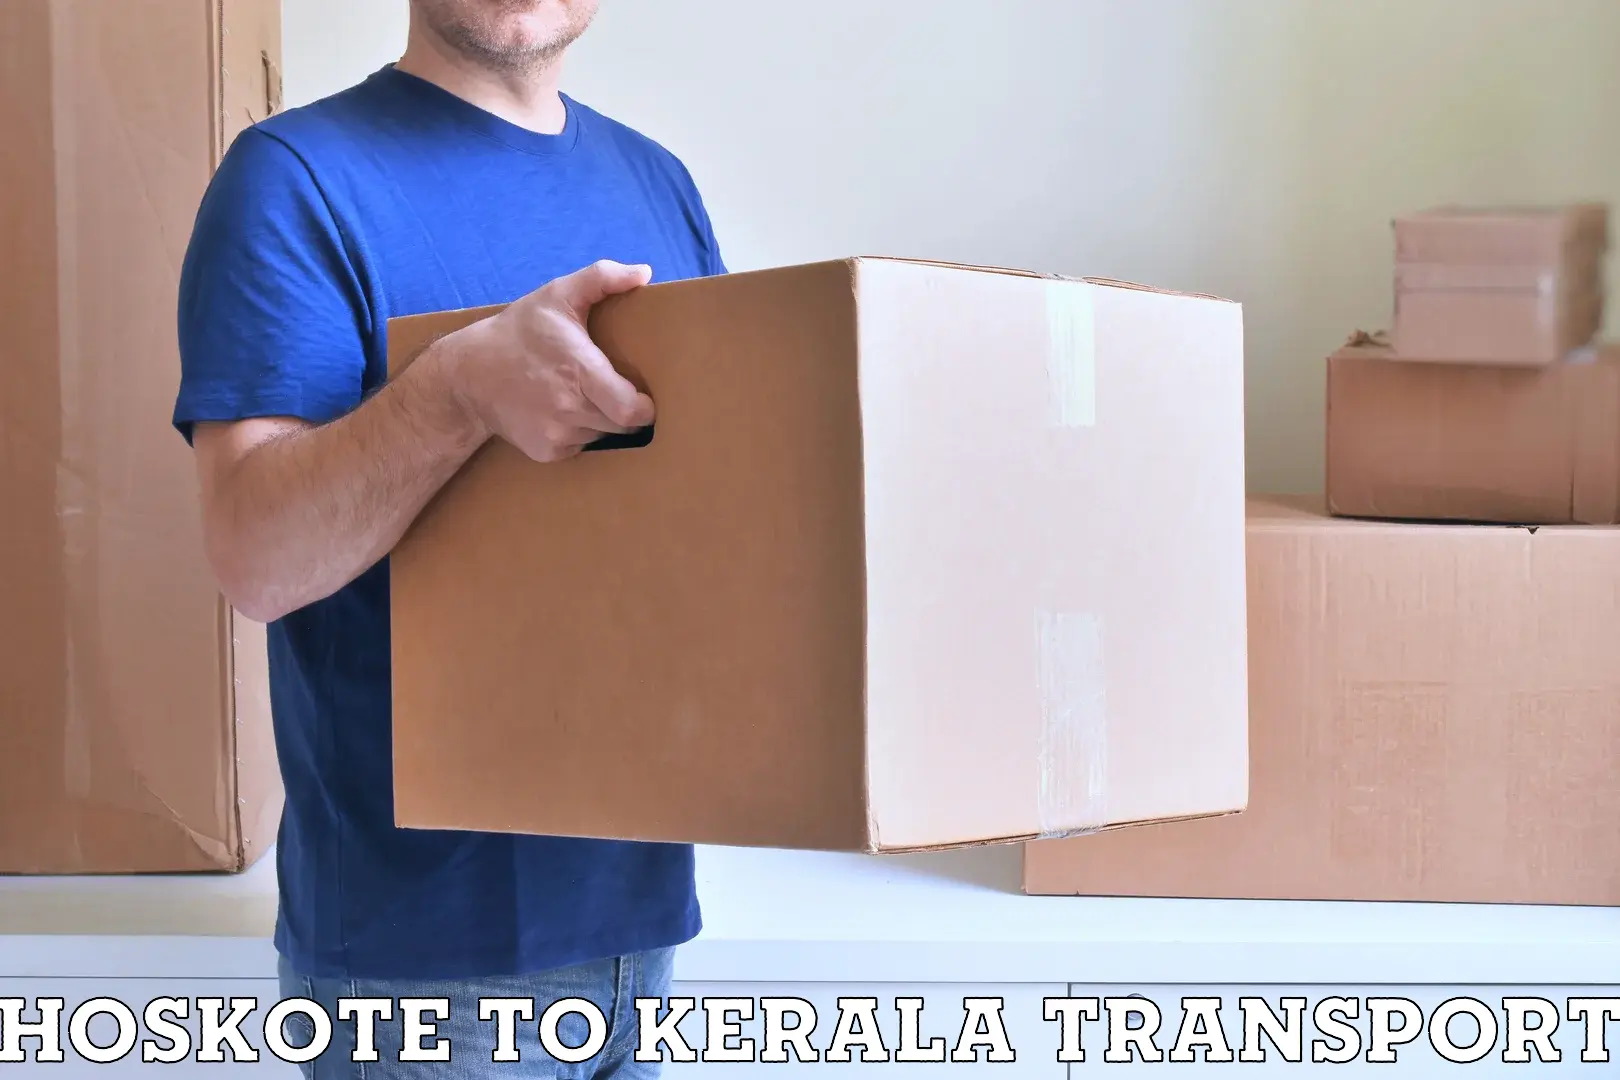 Daily parcel service transport Hoskote to Kerala